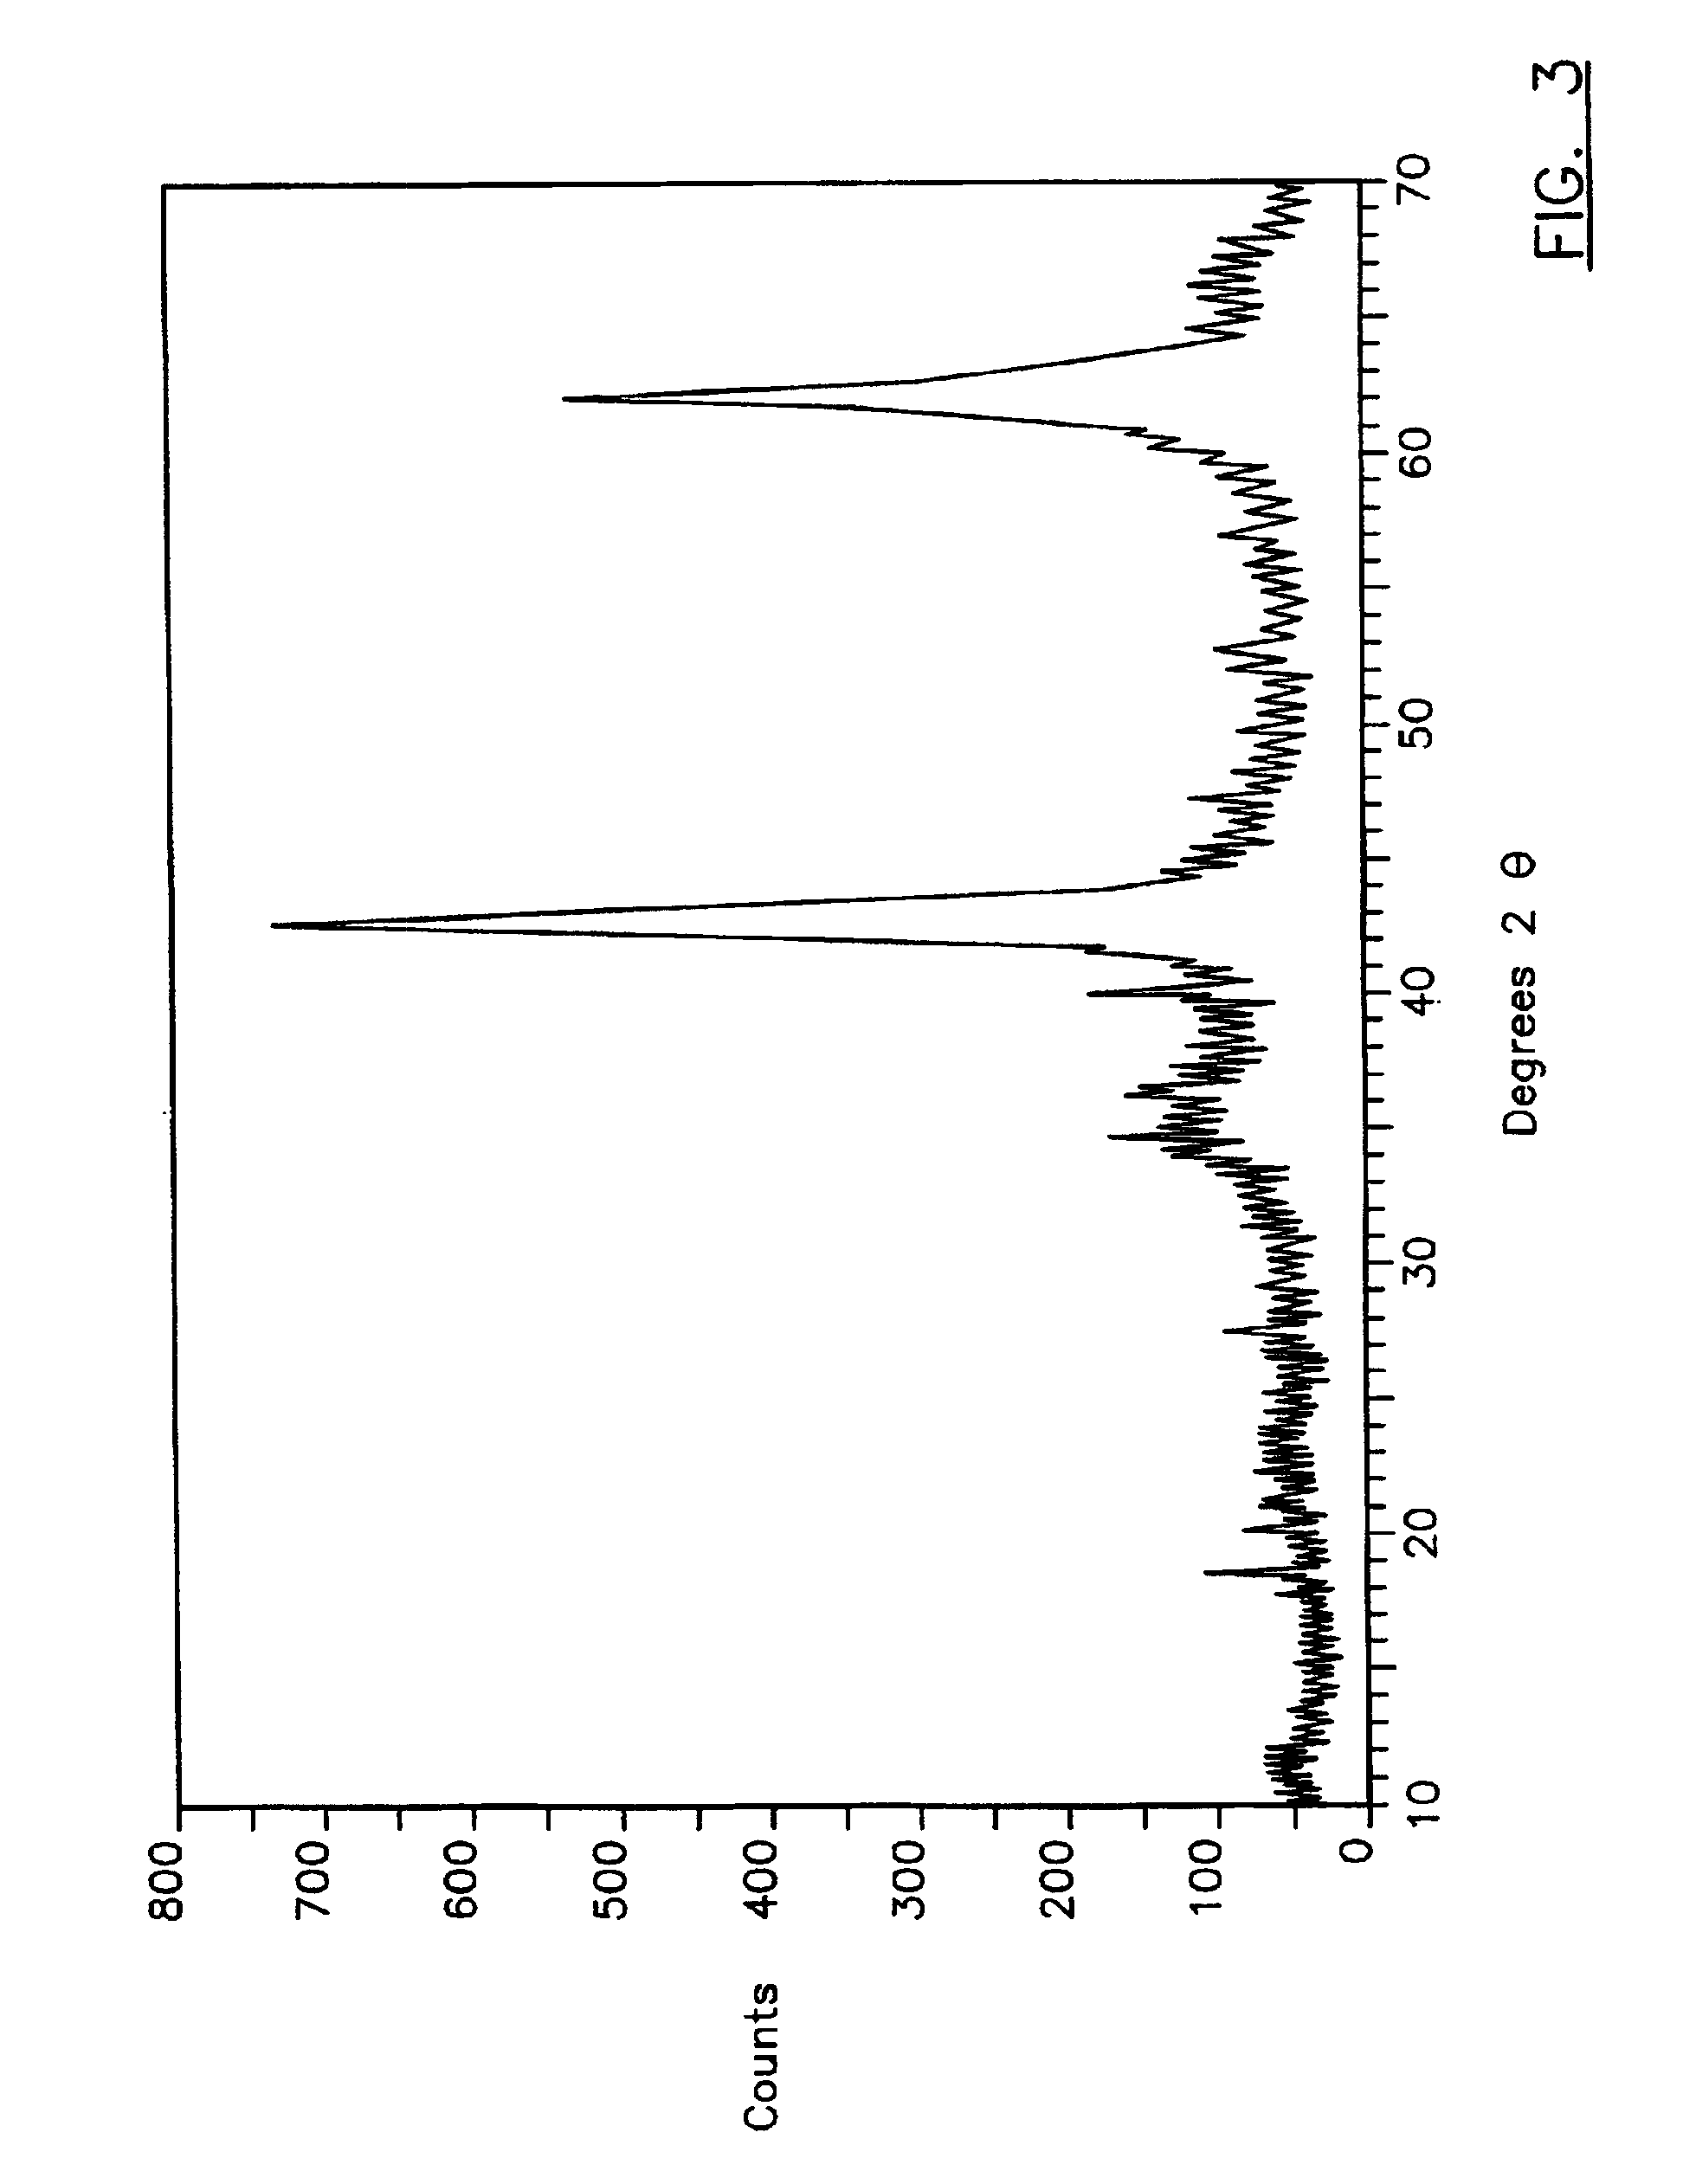 Rheology modified compositions and modification agents